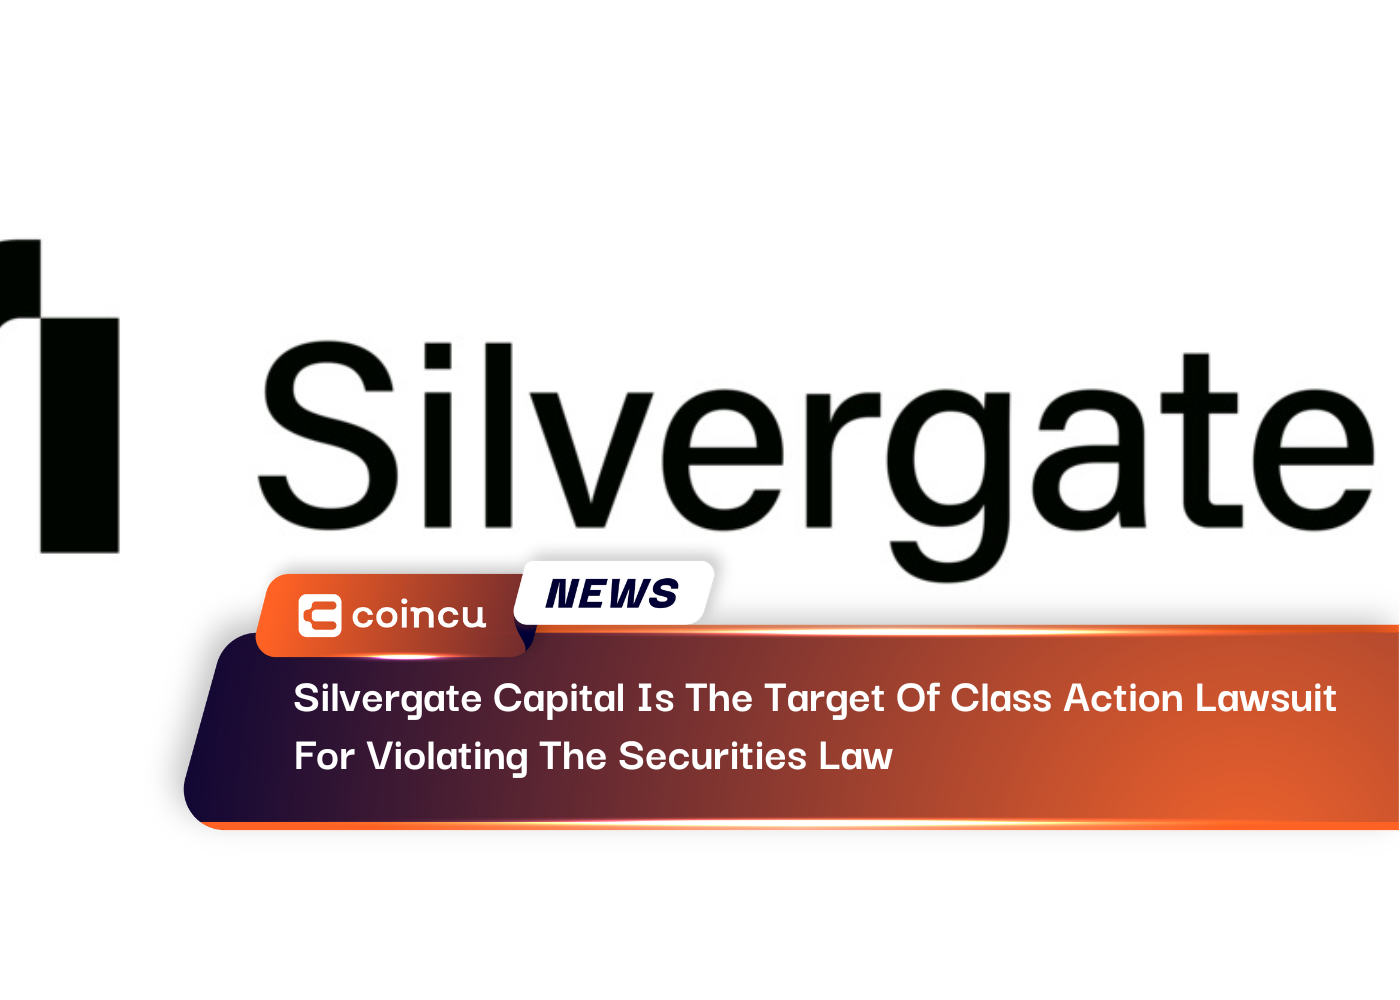 Silvergate Capital Is The Target Of Class Action Lawsuit